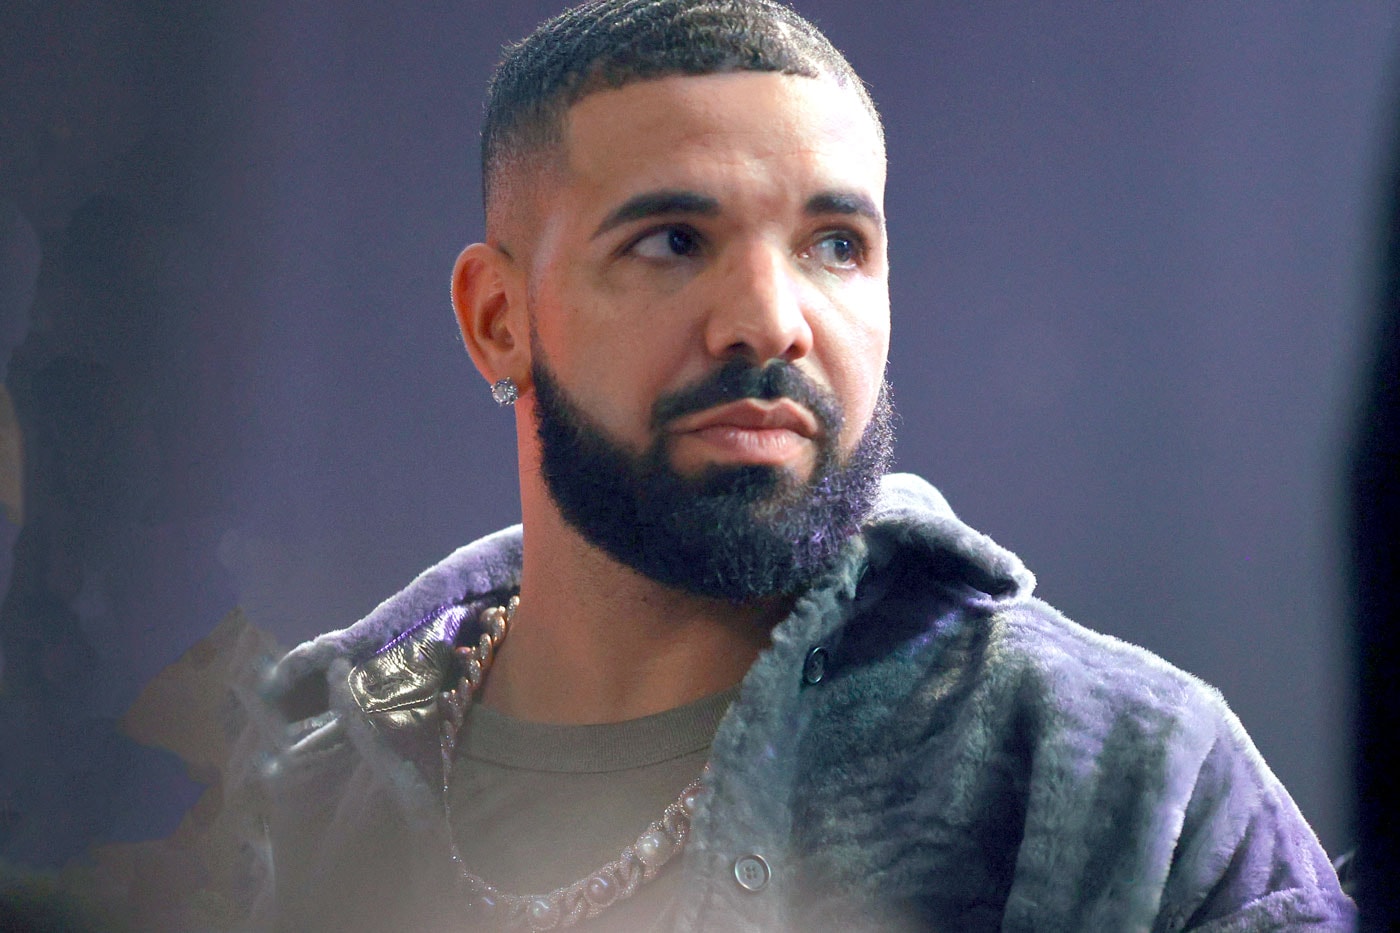 A Suspect Has Been Arrested for Stealing $3 Million in Jewelry From Drake's Bus